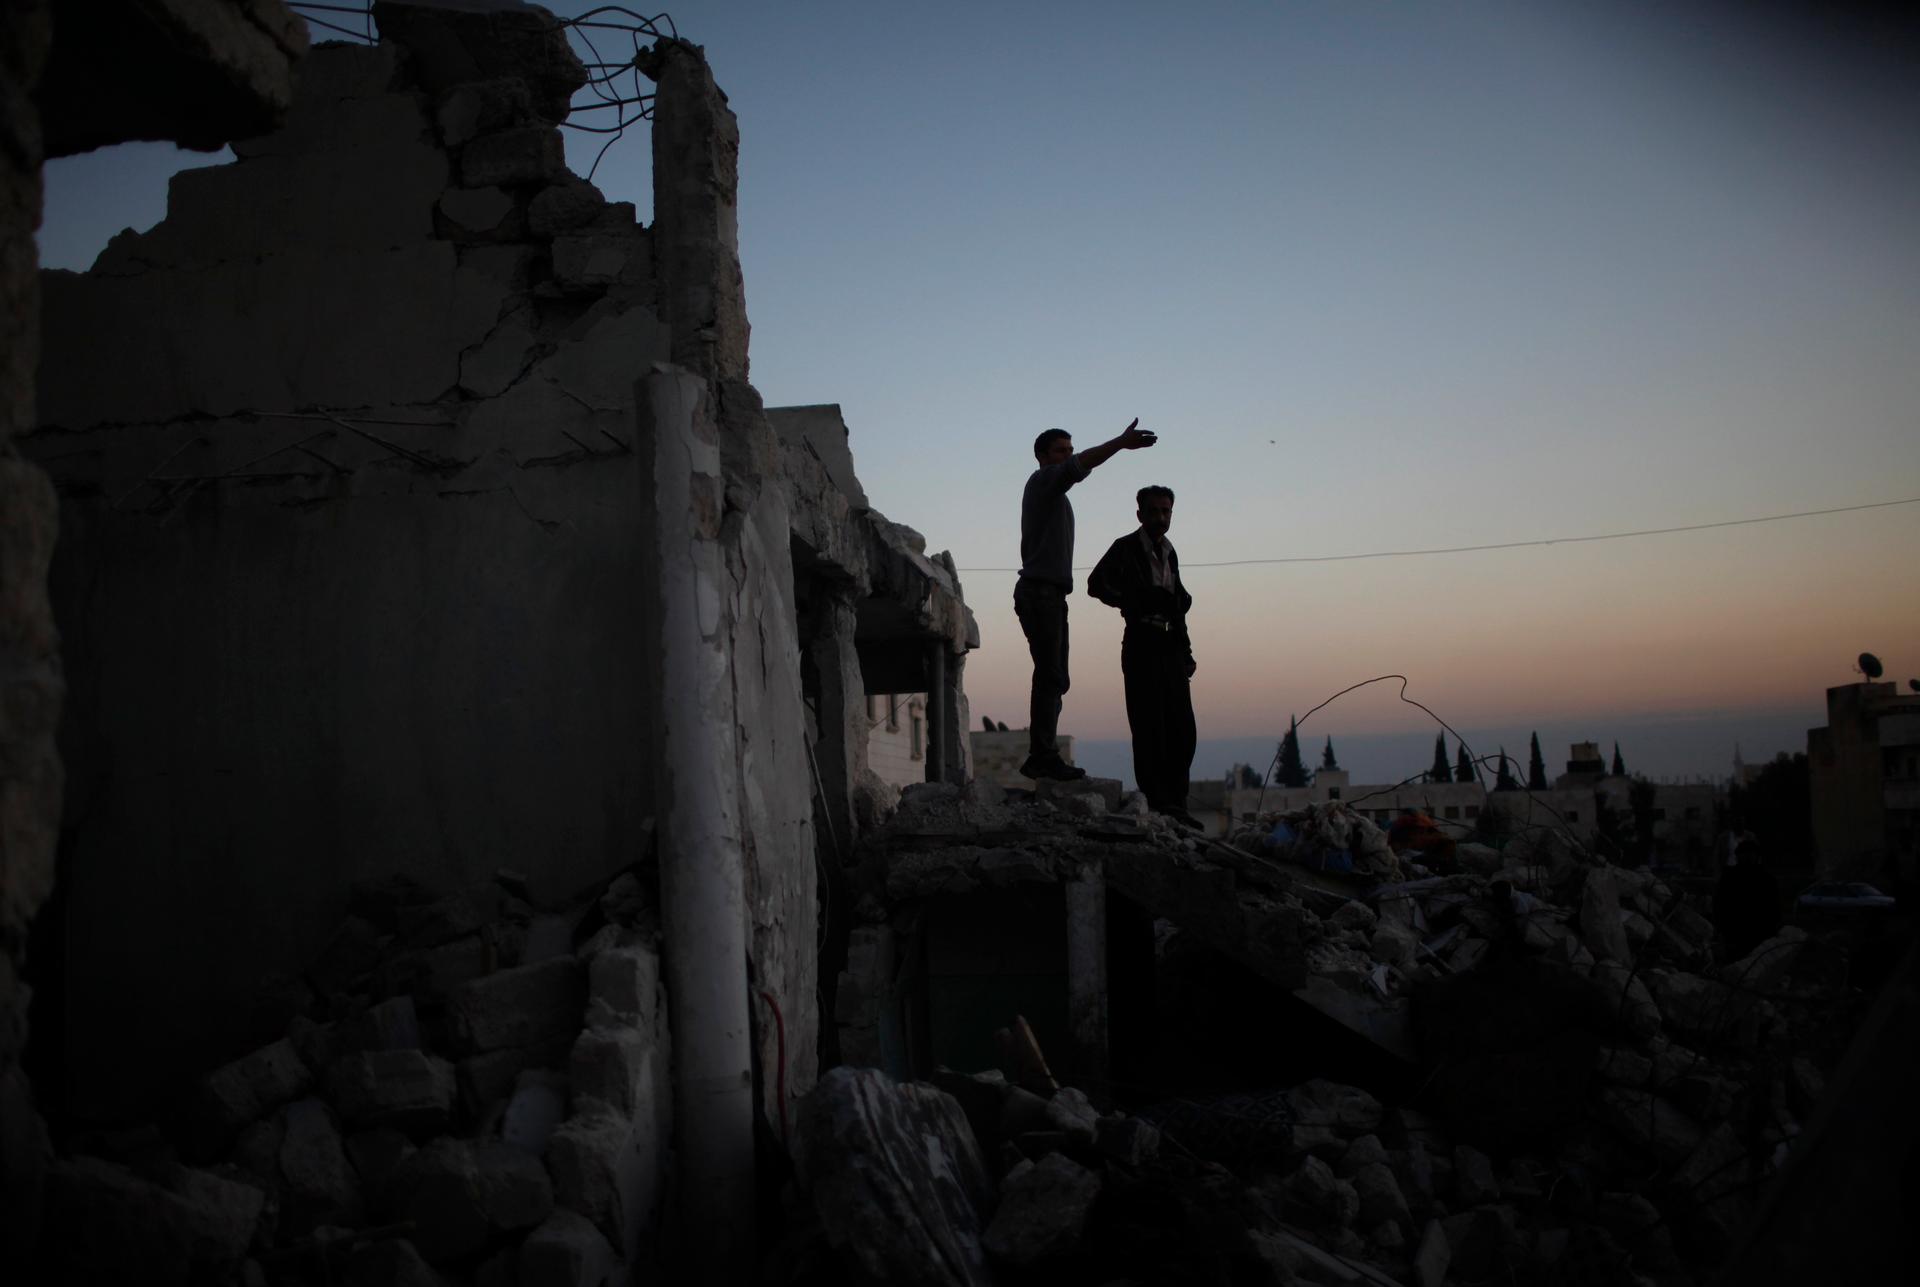 Syrians search for survivors after an air strike by a fighter jet loyal to Syrian President Bashar al-Assad in Azaz city, North Aleppo, December 29, 2012.